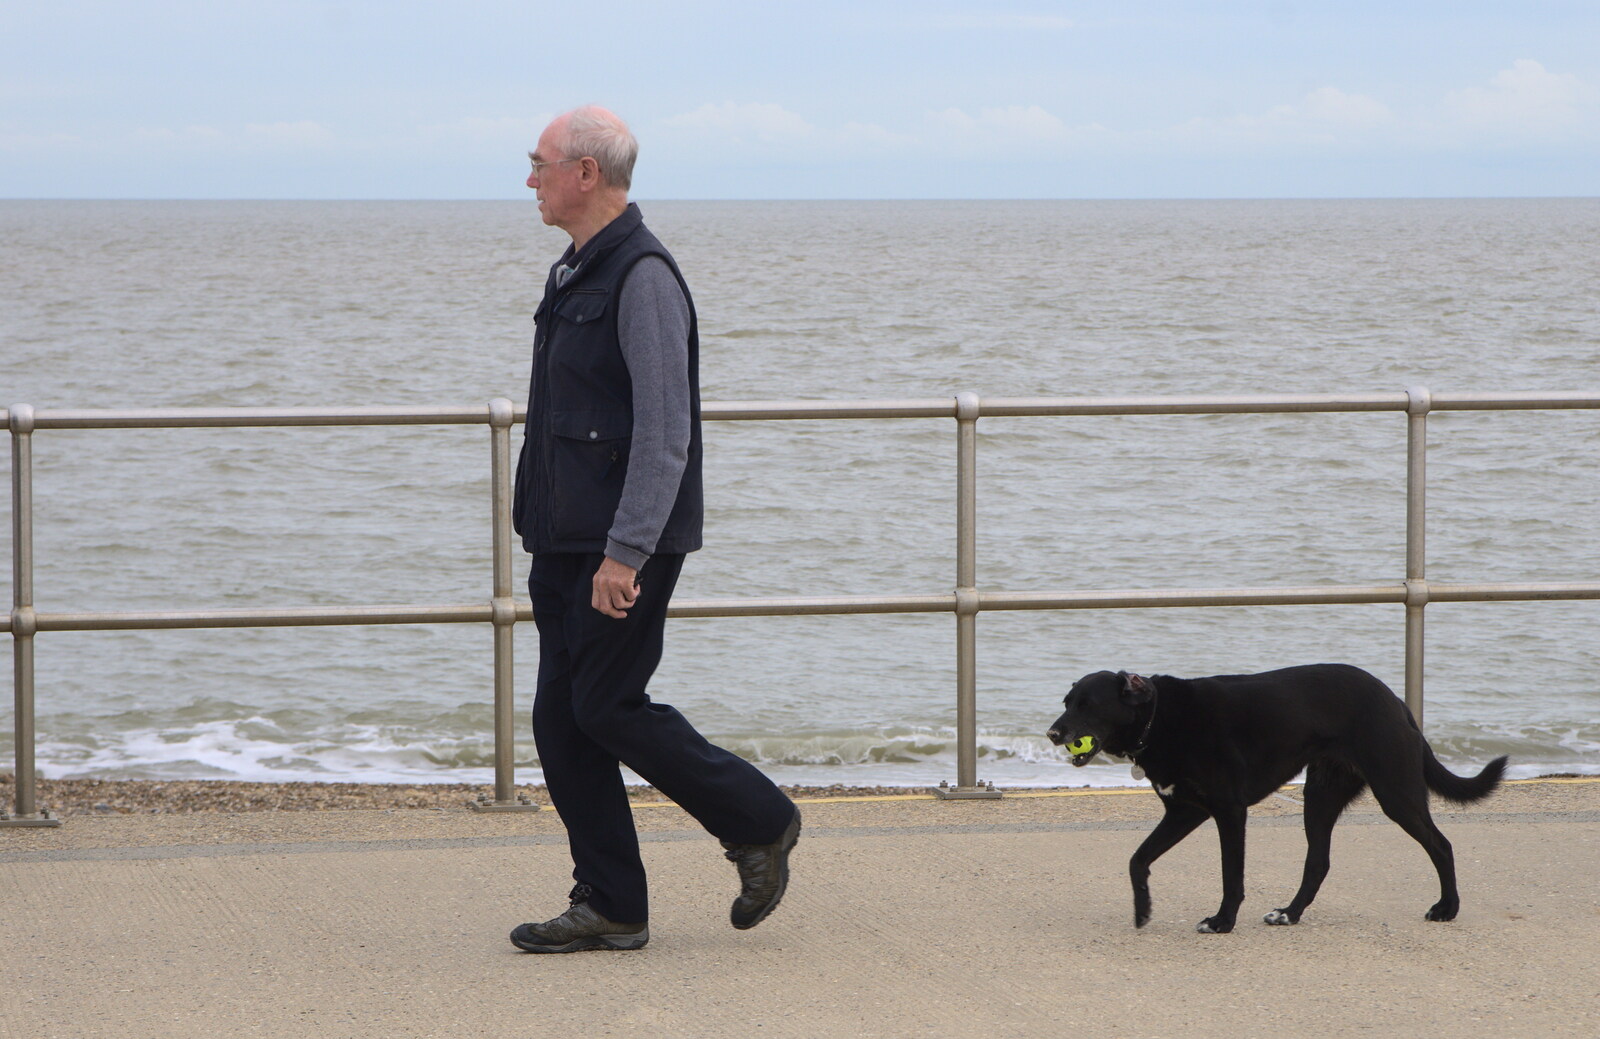 A bloke with his dog from On The Beach Again, Southwold, Suffolk - 12th October 2014